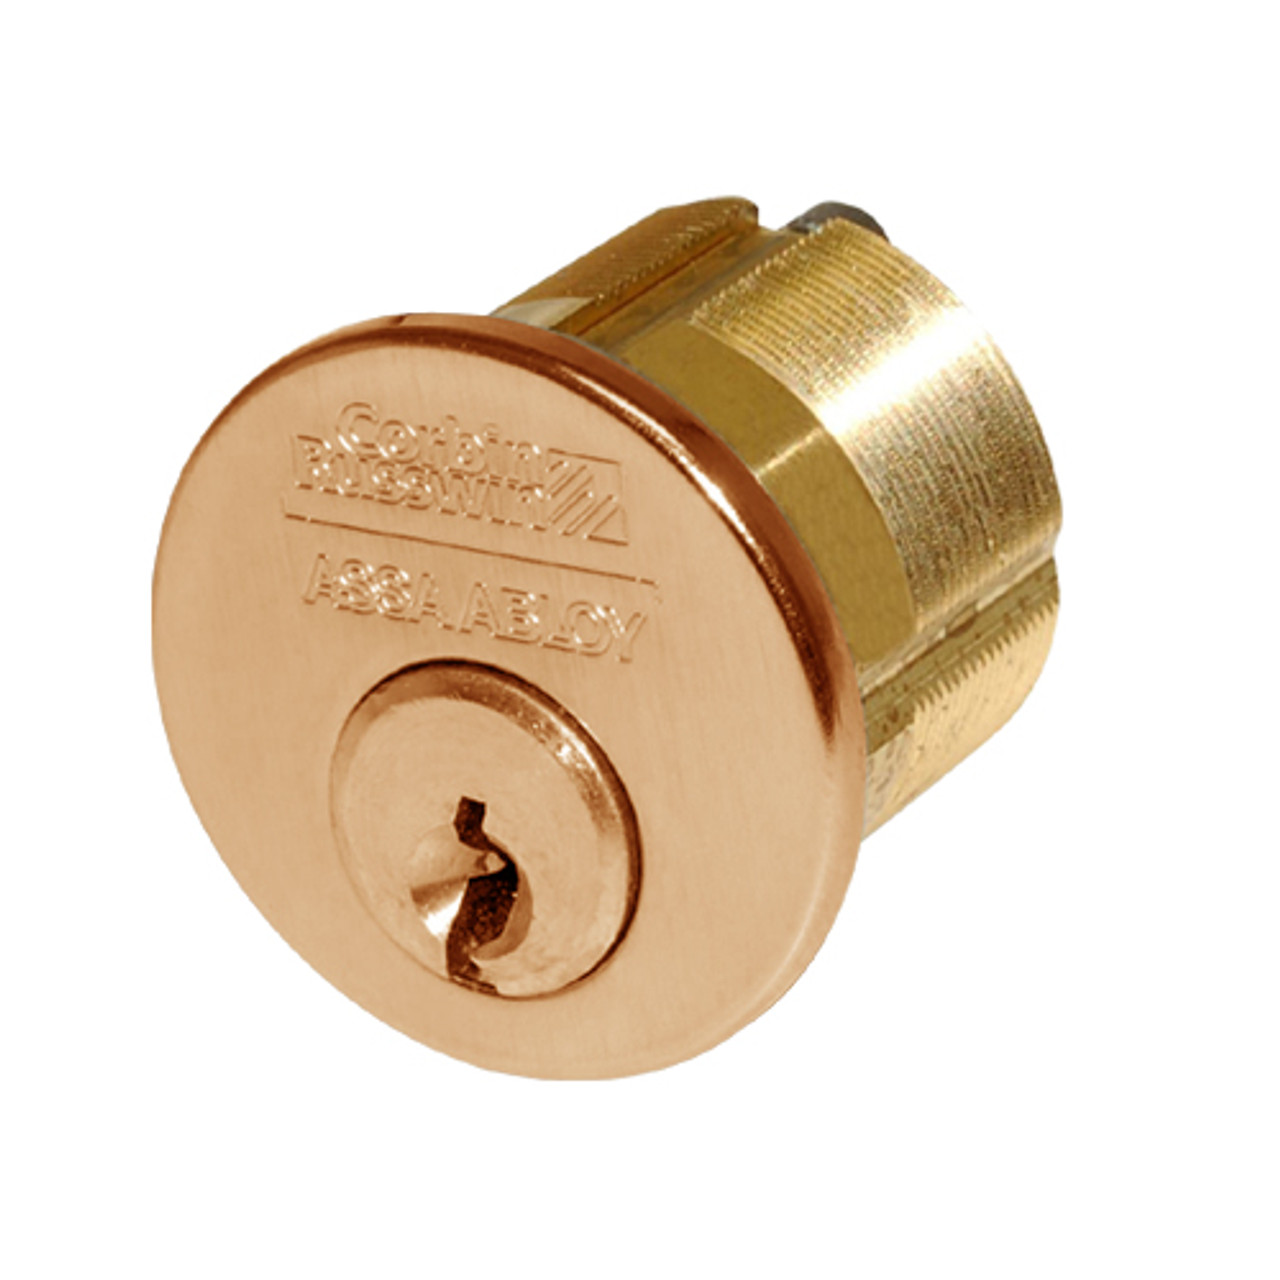 CR1000-118-A01-6-N2-612 Corbin Conventional Mortise Cylinder for Mortise Lock and DL3000 Deadlocks with Cloverleaf Cam in Satin Bronze Finish